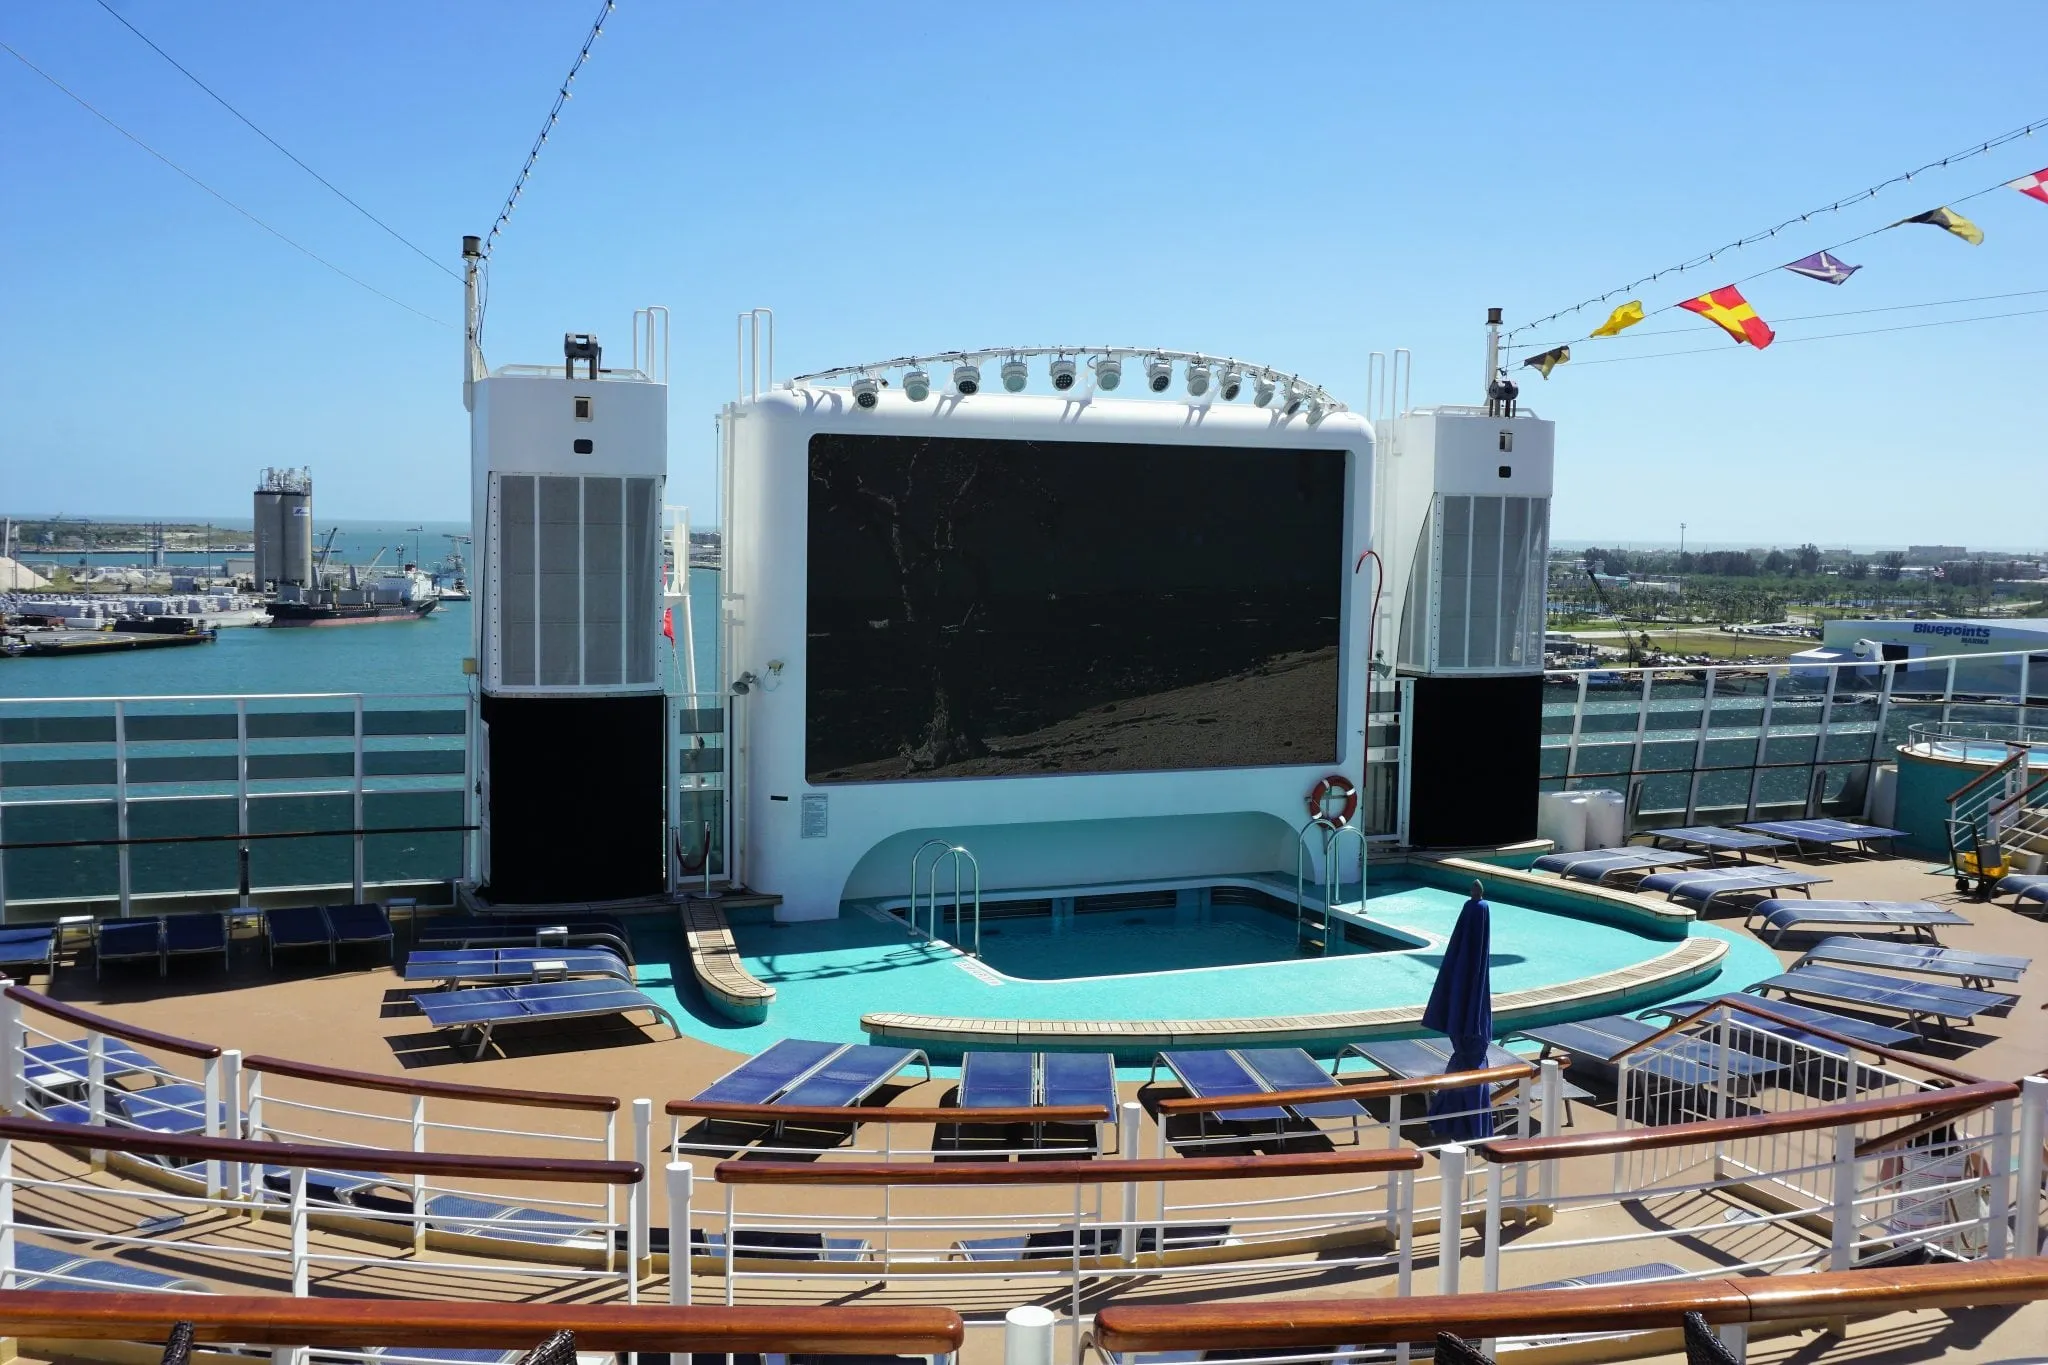 Top Things to Do on Norwegian Epic